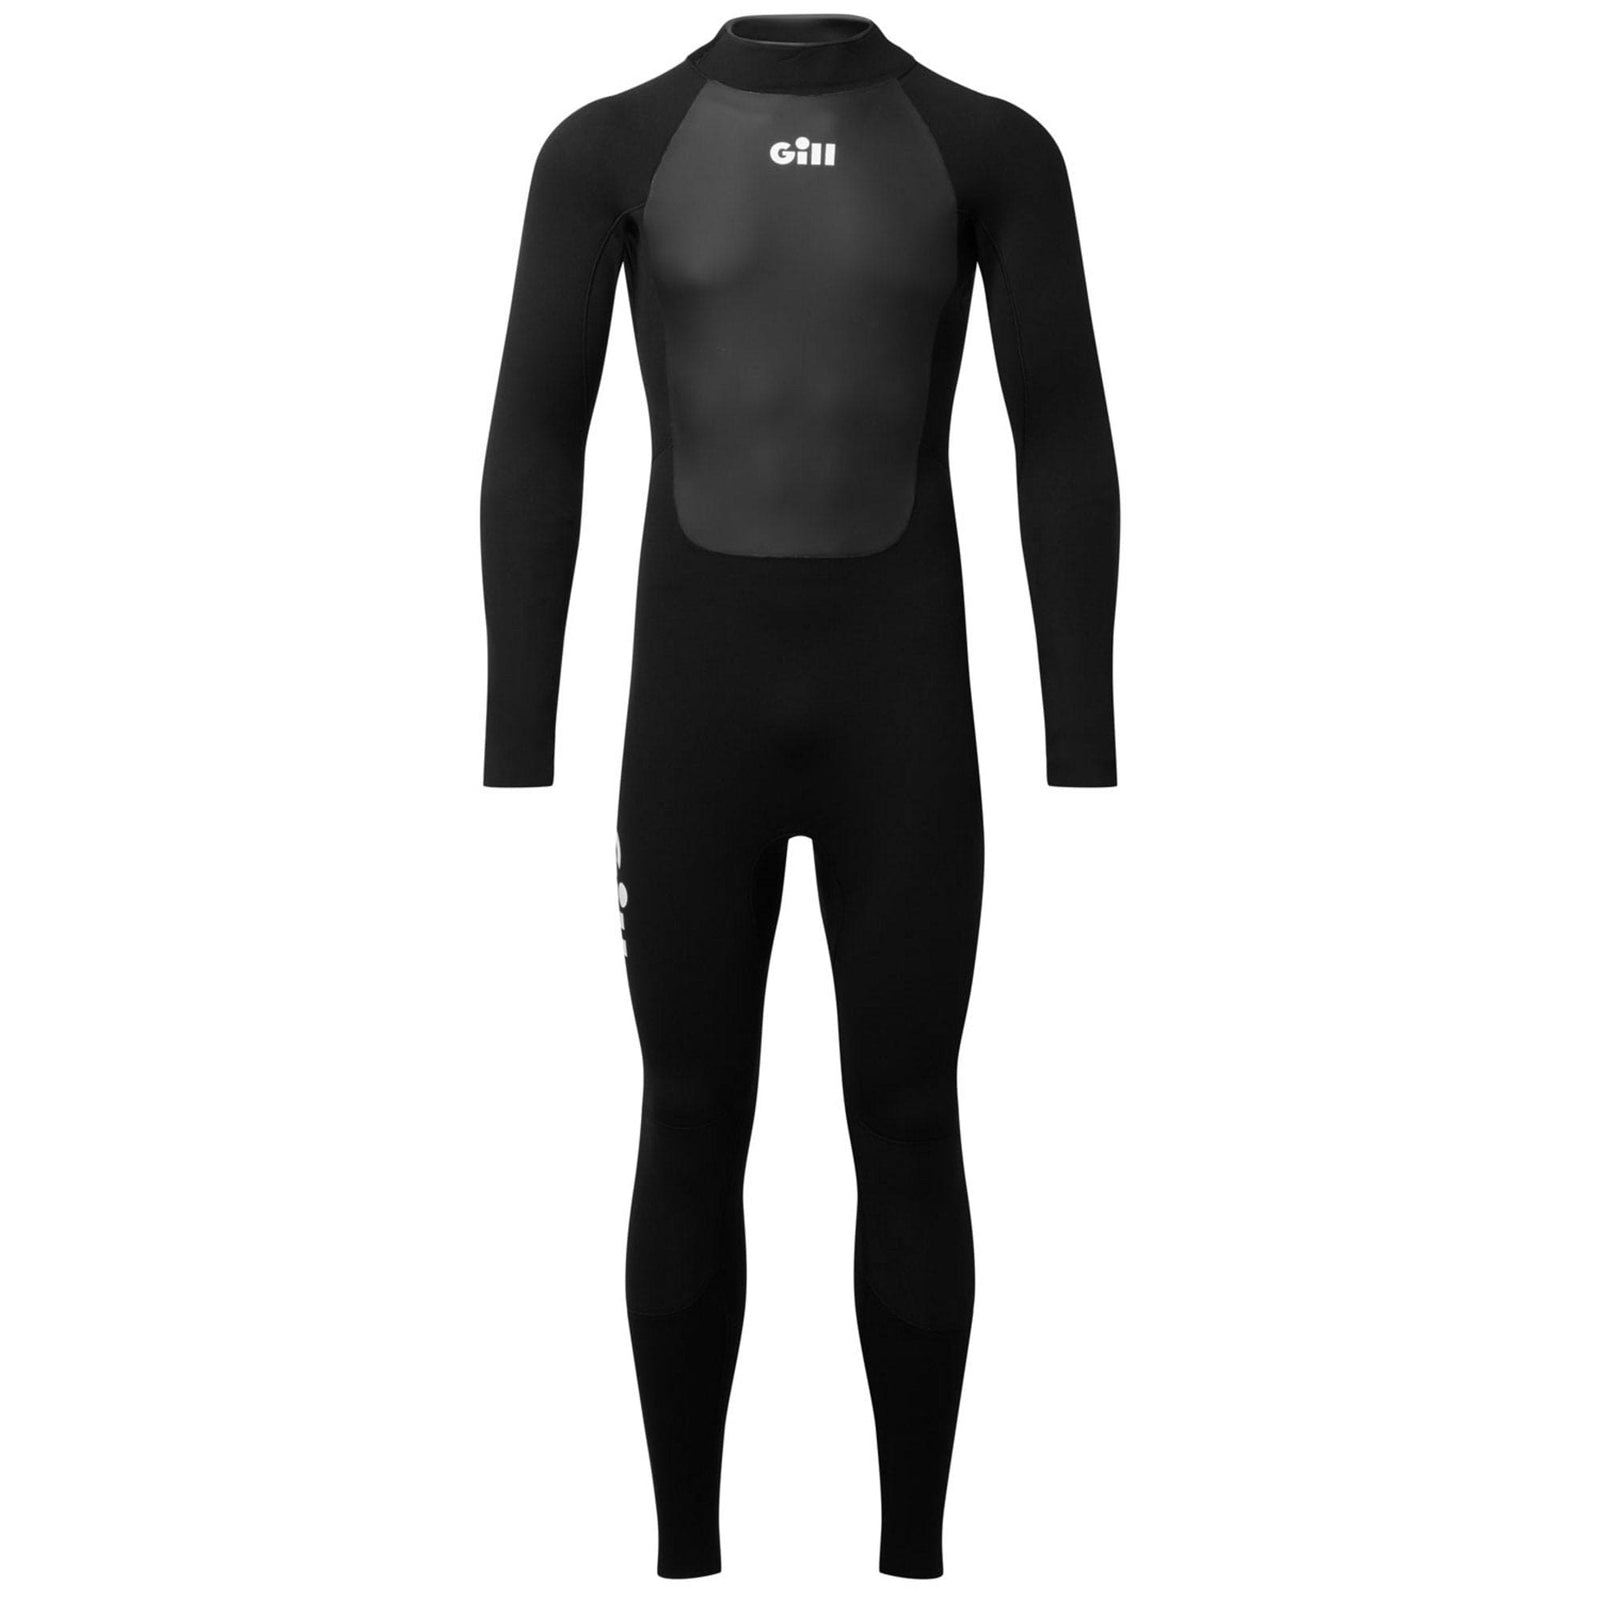 New Fishing Gear Tagged wetsuit - The Saltwater Edge